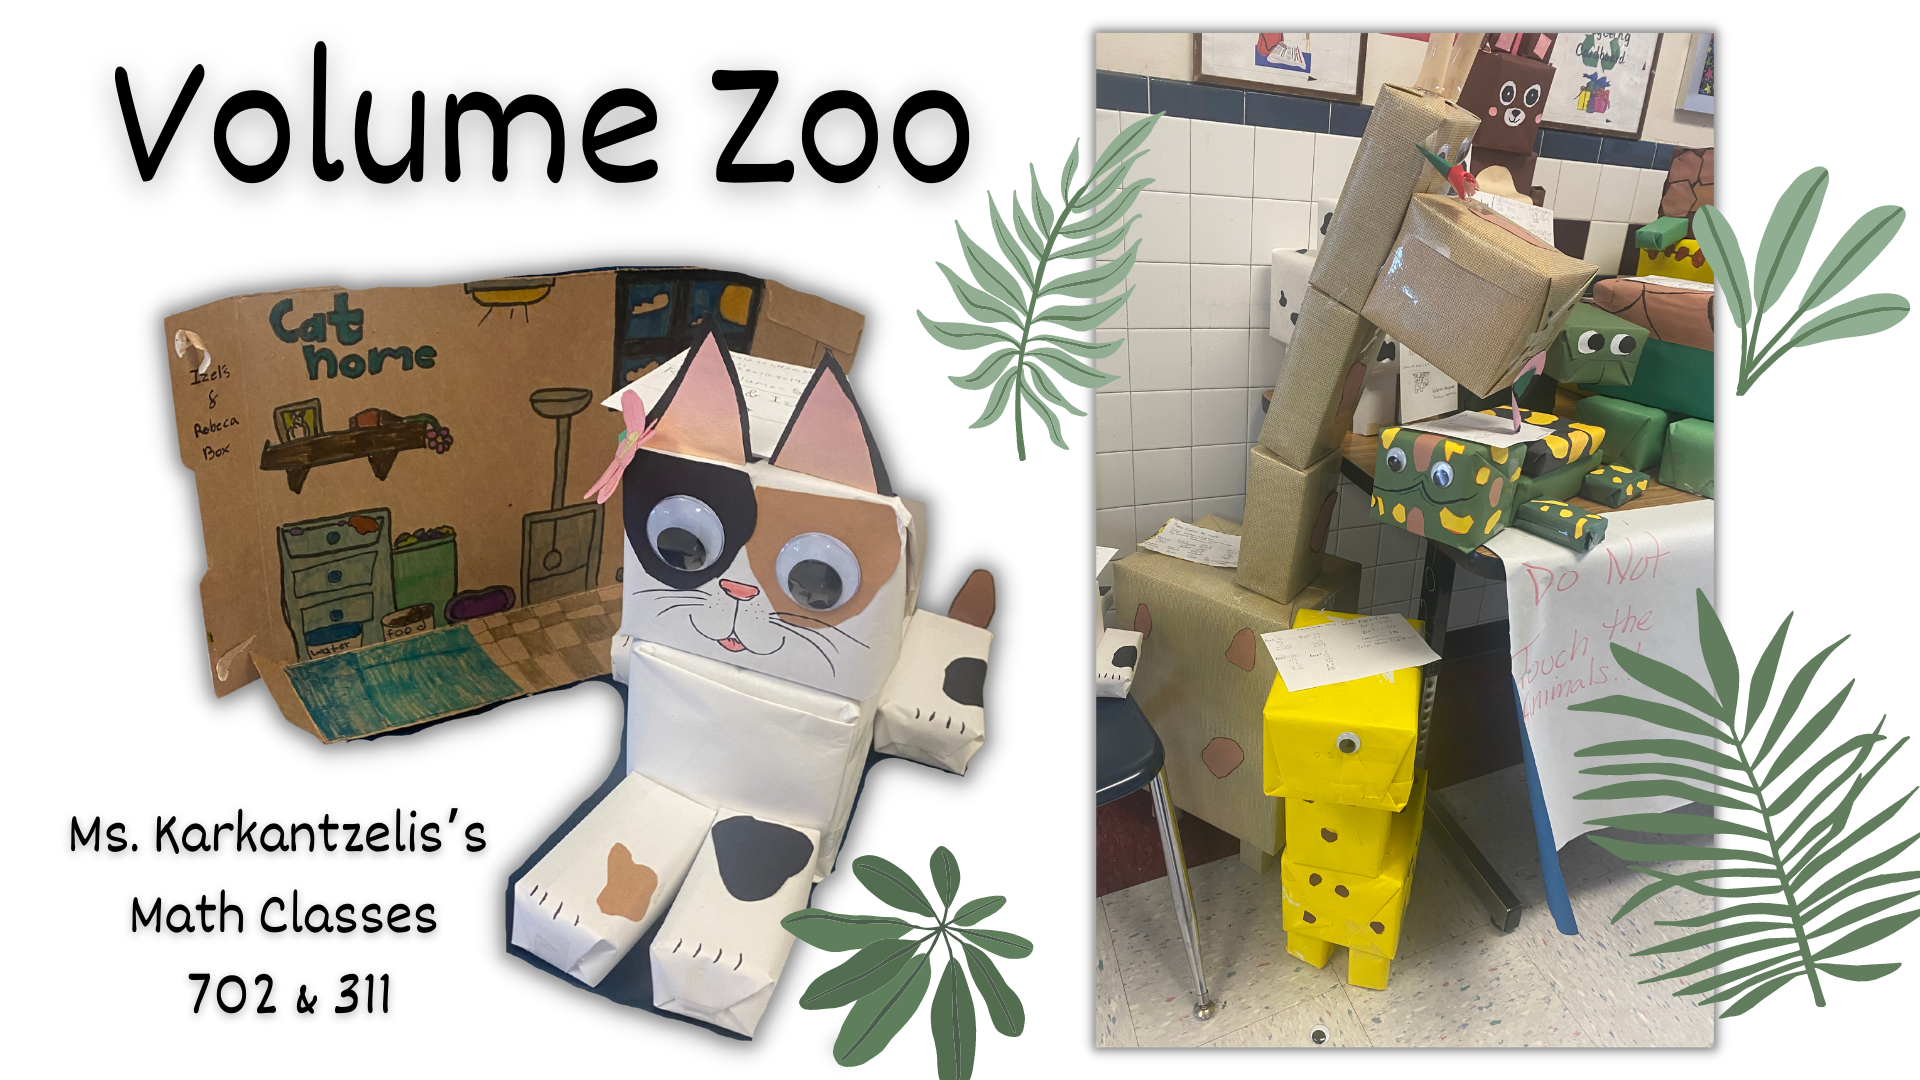 The Volume Zoo at the Roosevelt School